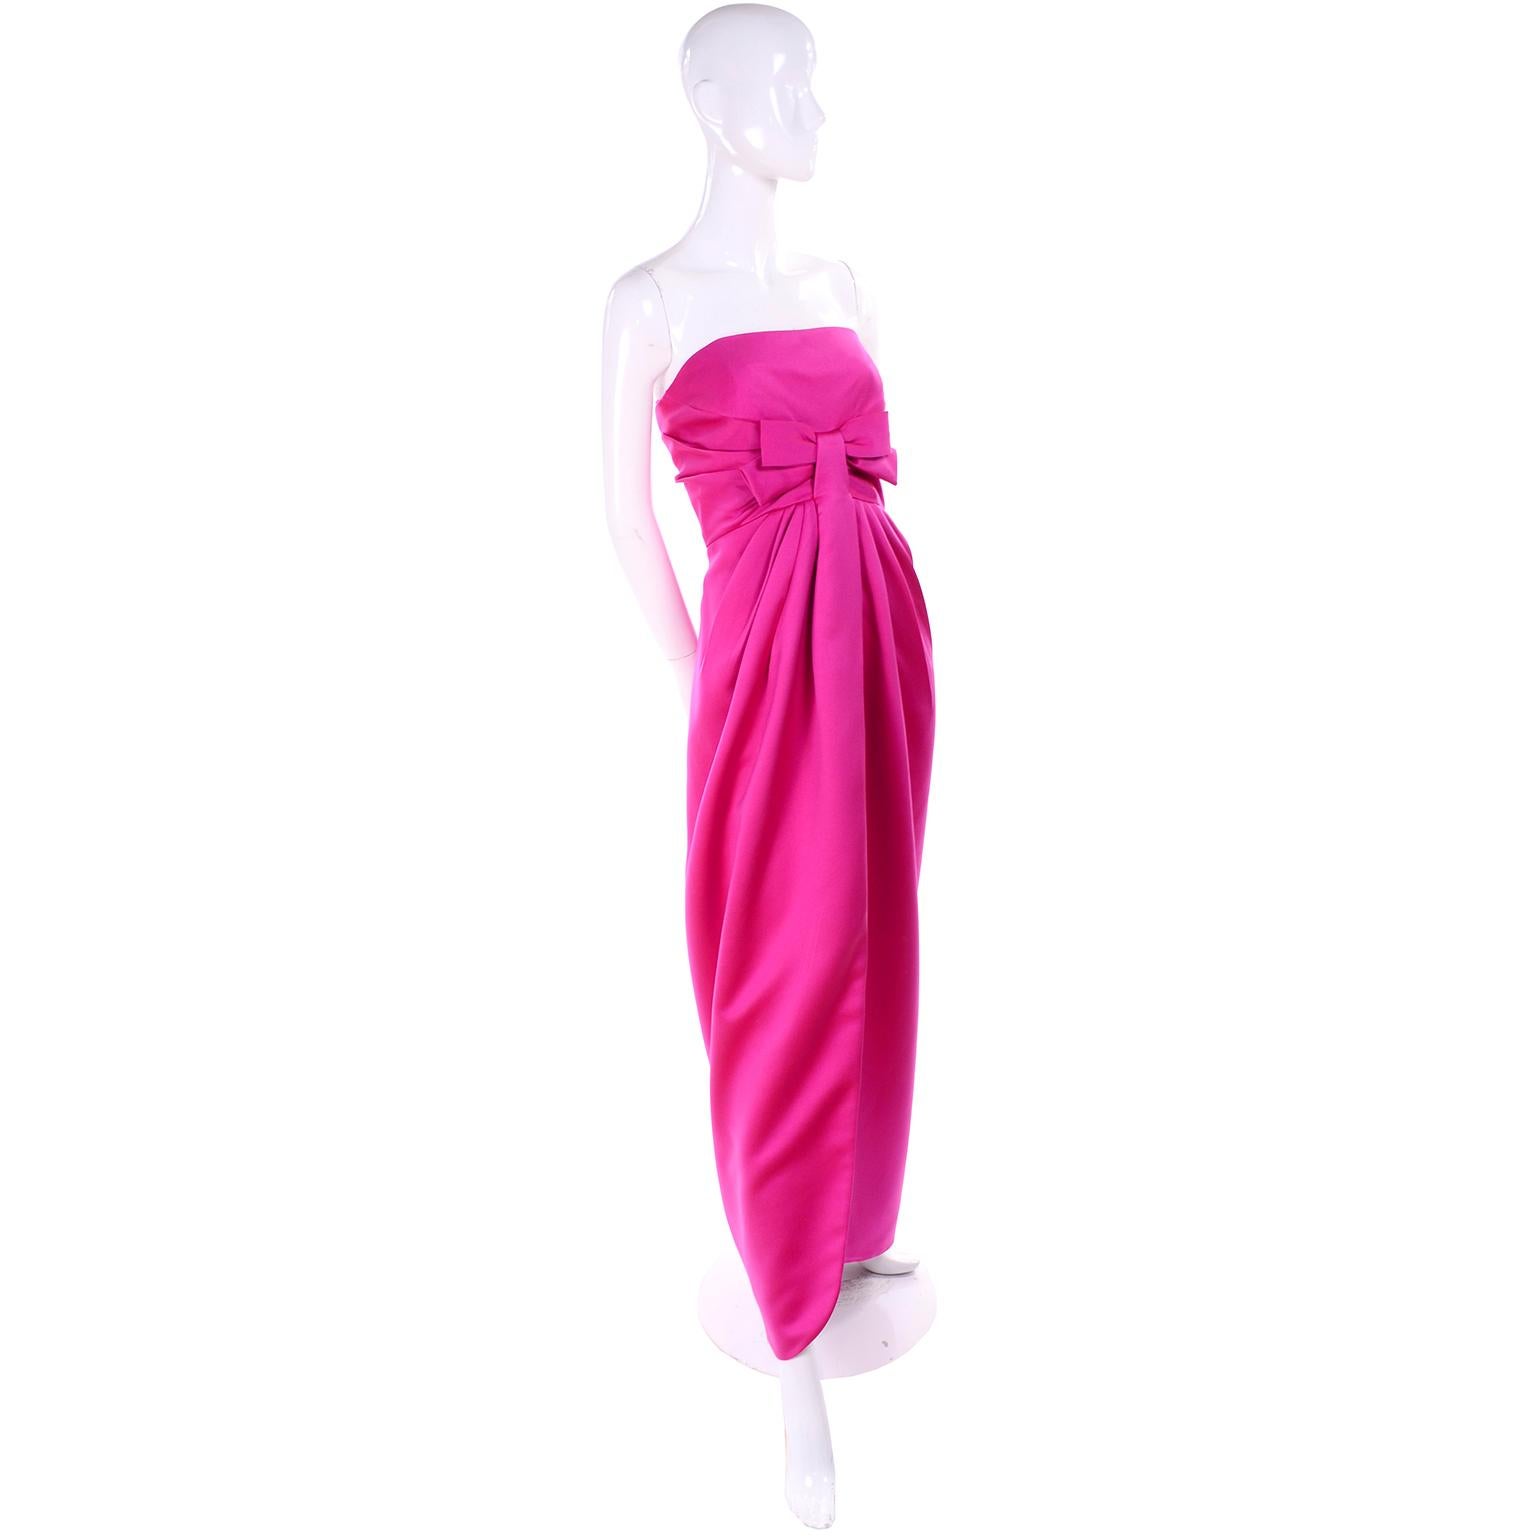 This wonderful vintage pink satin dress was designed by Victor Costa in the late 1980's. This evening gown is in such a wonderful shade of pink and it comes with a long sleeve cropped bolero jacket for those chilly evenings.  The dress is strapless